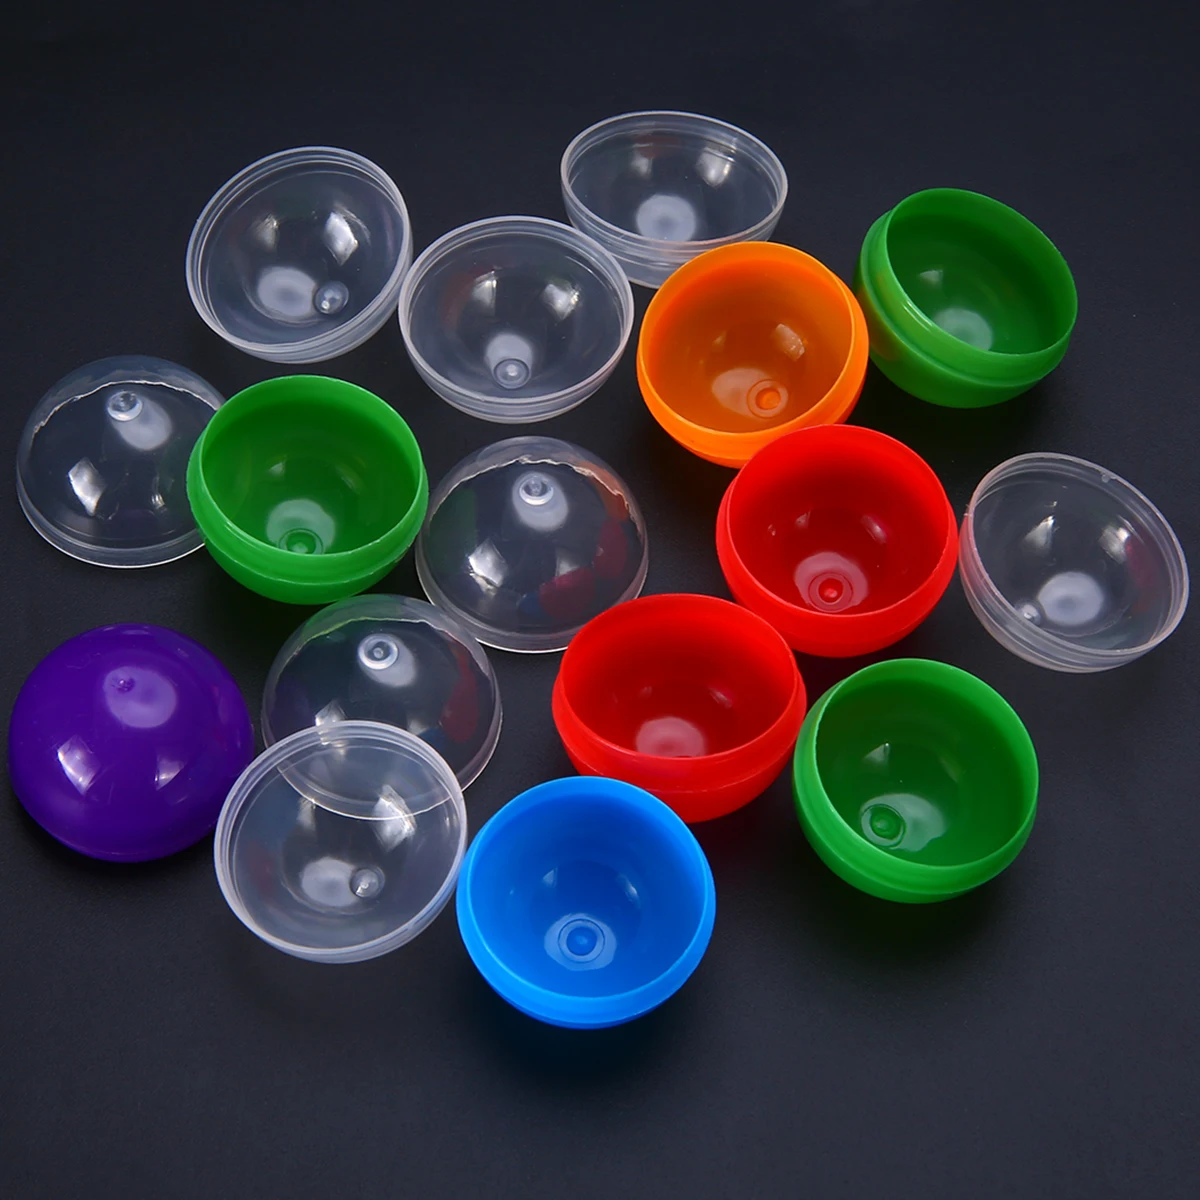 10Pcs Mix Colored 1.2'' Vending Toy Capsules Vending Machine Empty Round Toy Capsules 32mm Diameter For Event Party Gift